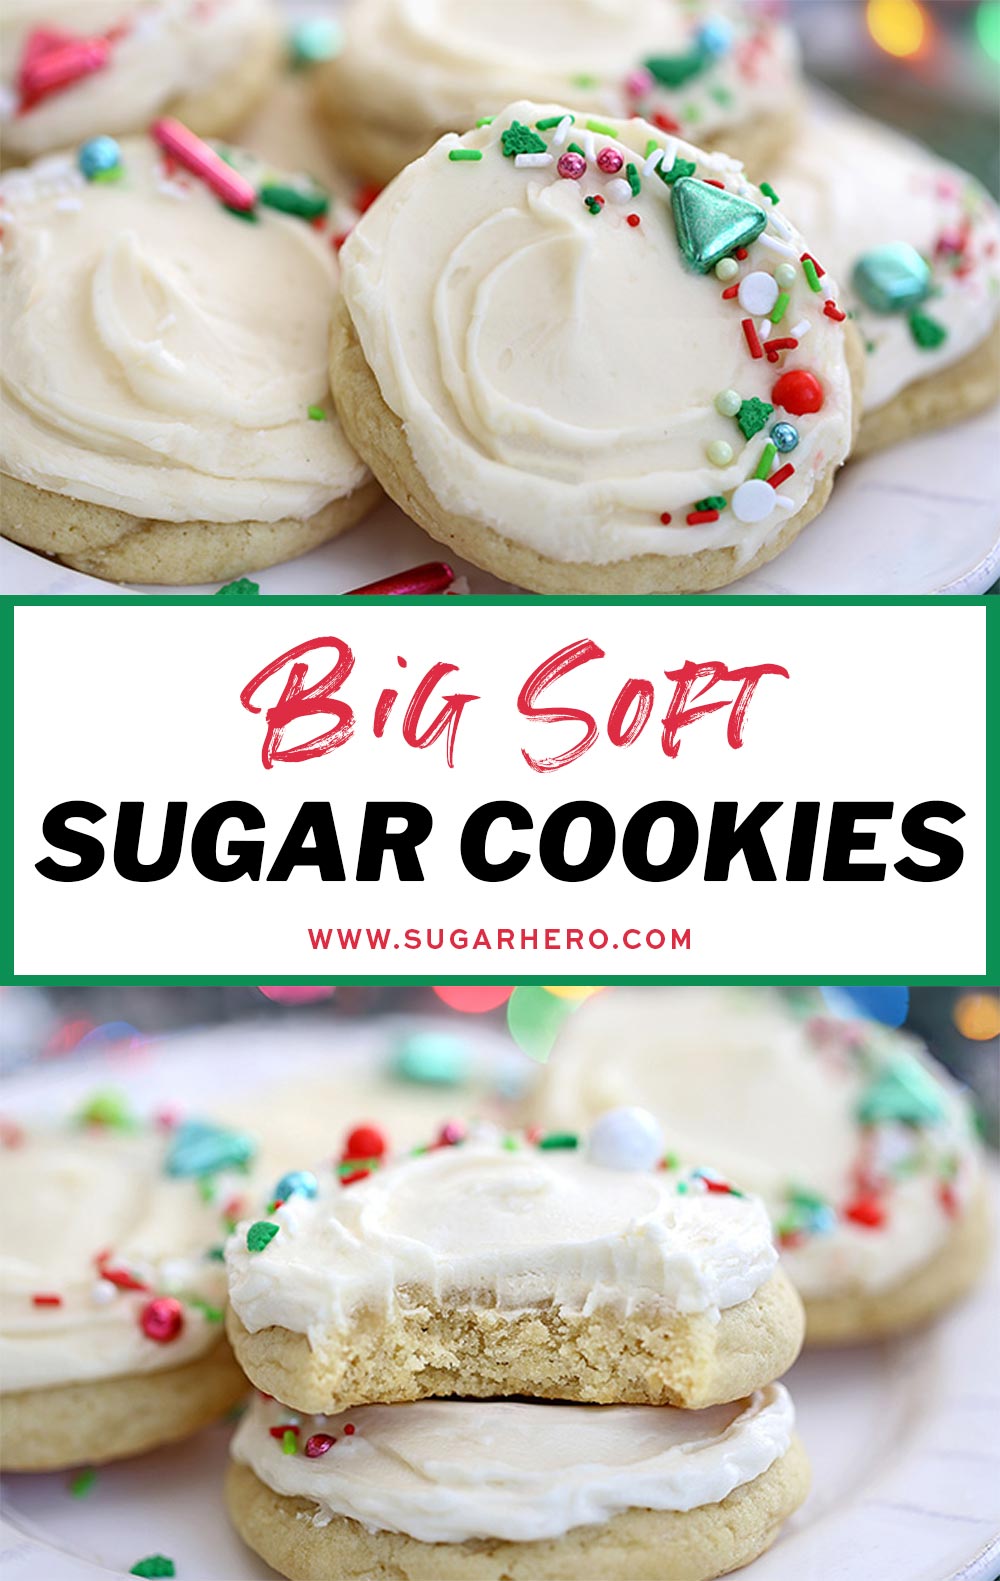 Pinterest collage with a photo of big soft sugar cookies above and below text that reads "Big Soft Sugar Cookies".